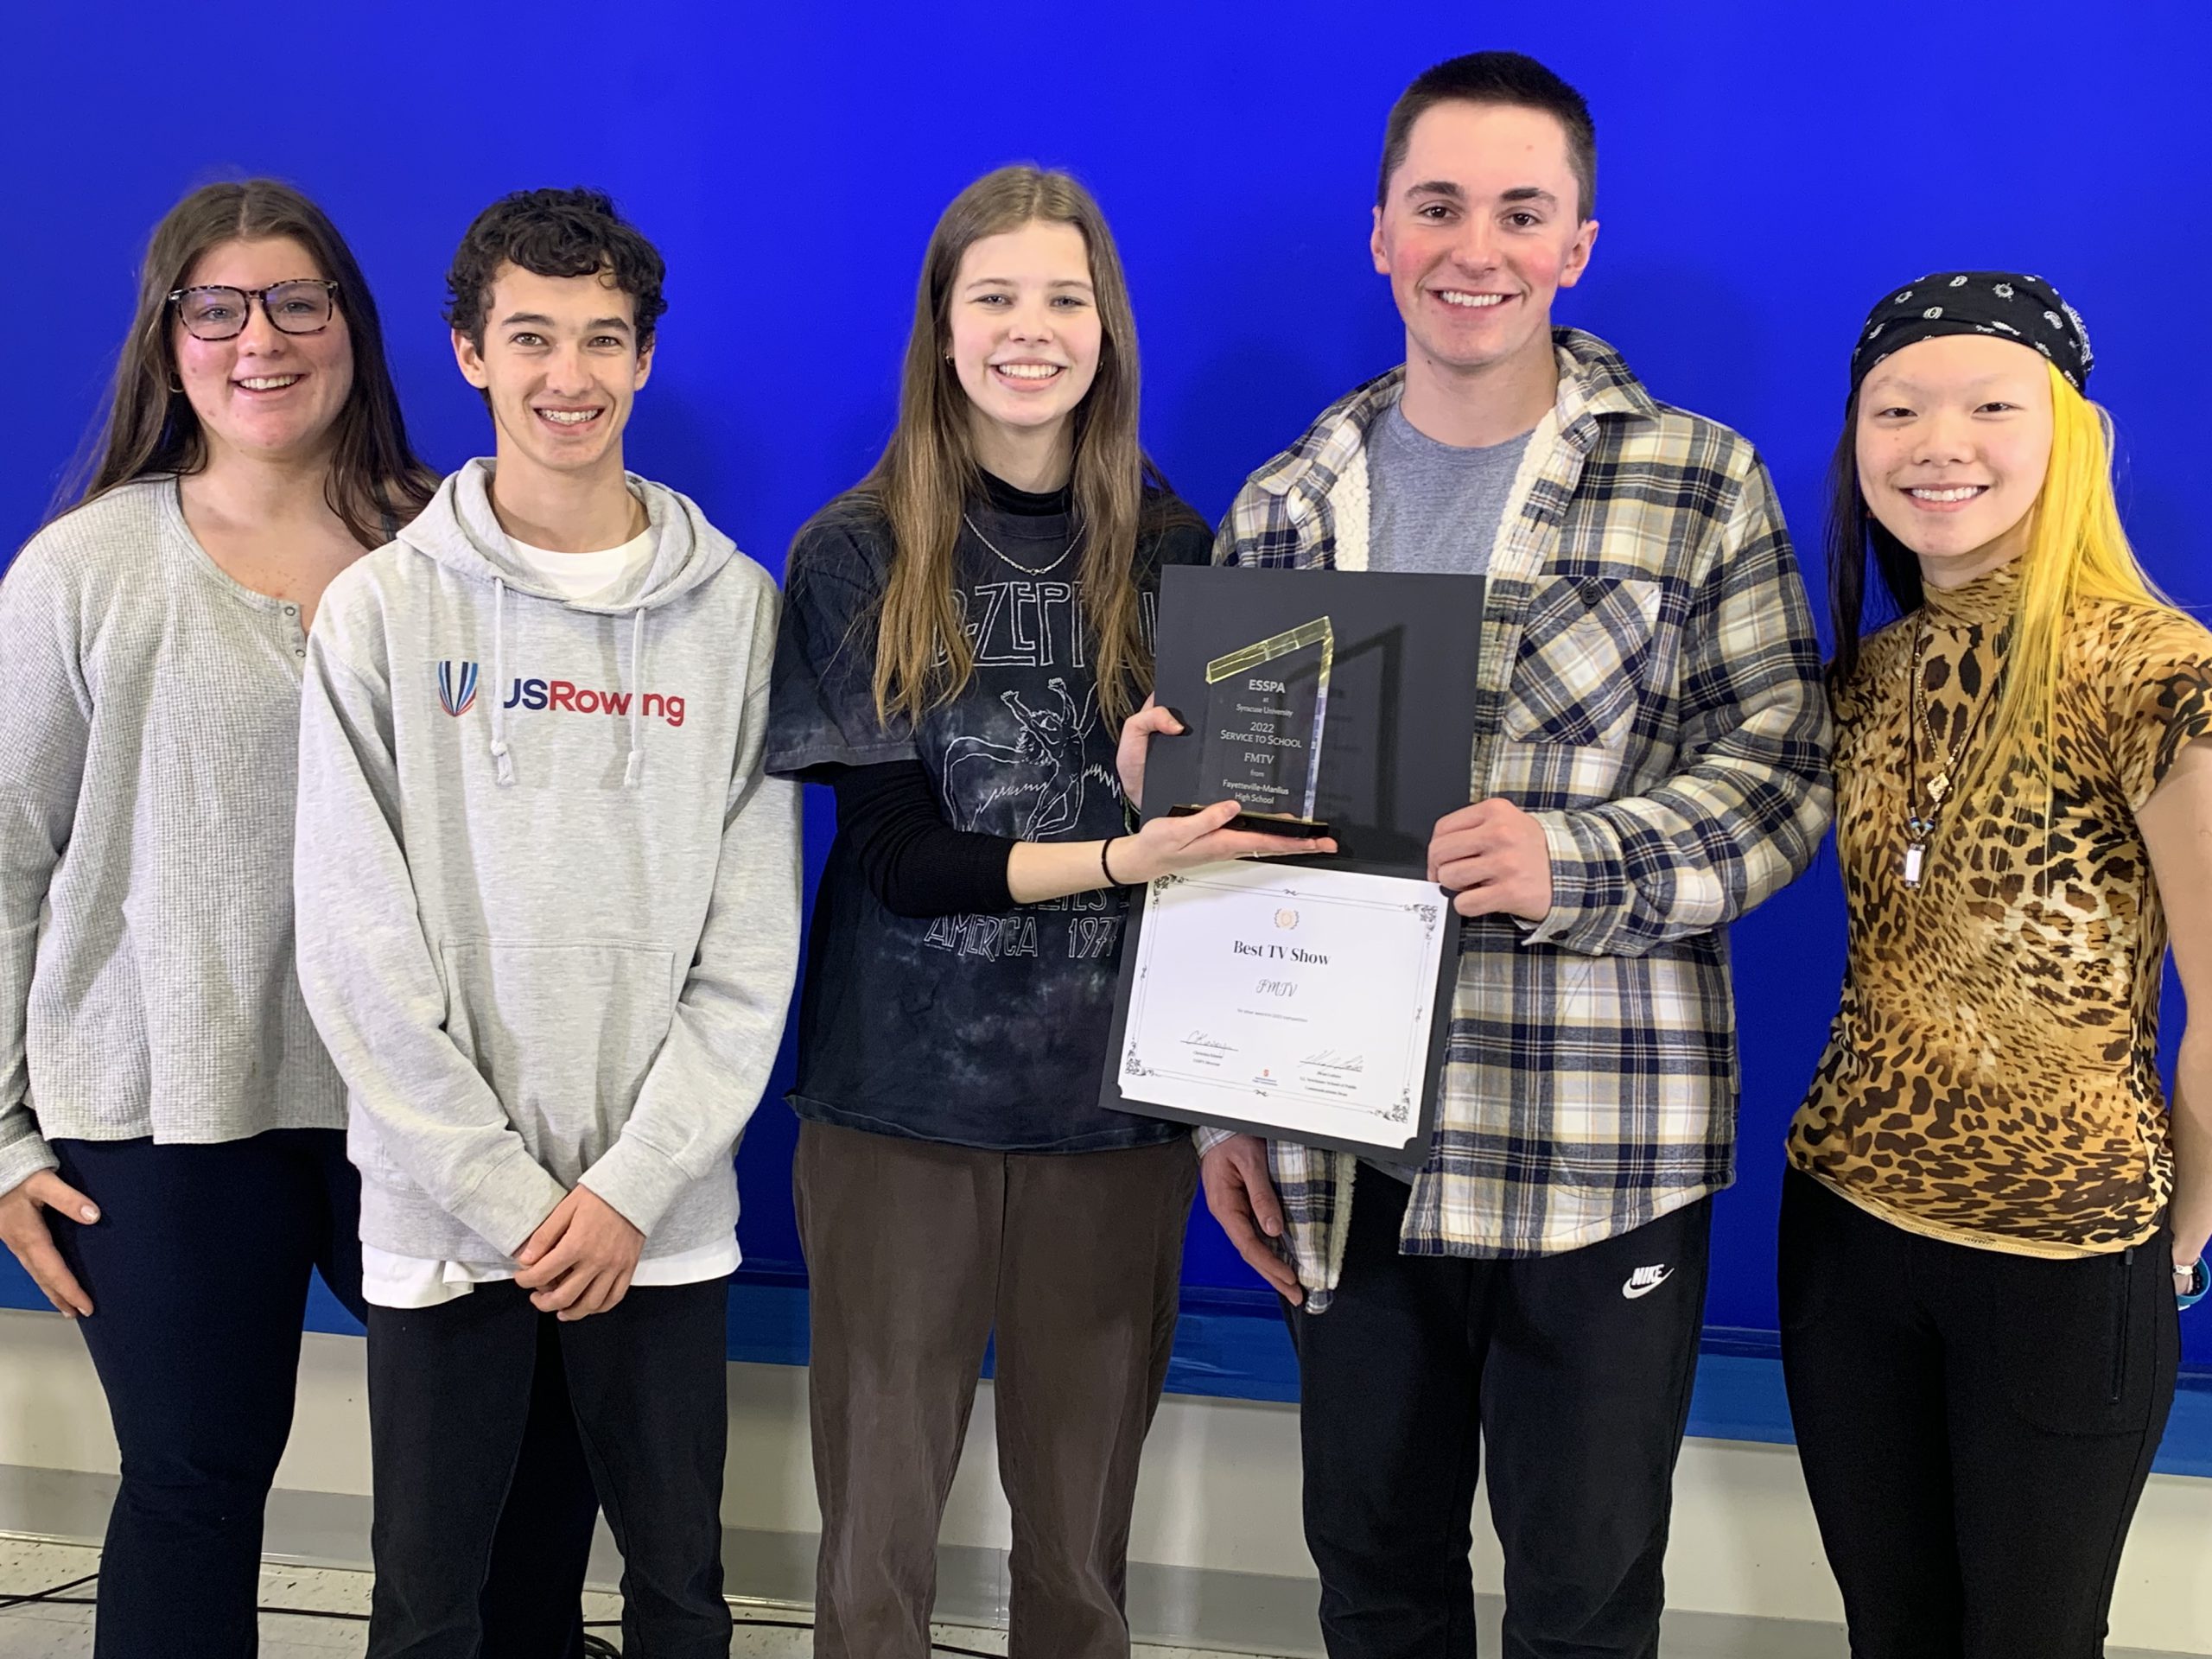 Five high school students stand together for a photo. One of them is holding an award, and another student is holding a certificate.